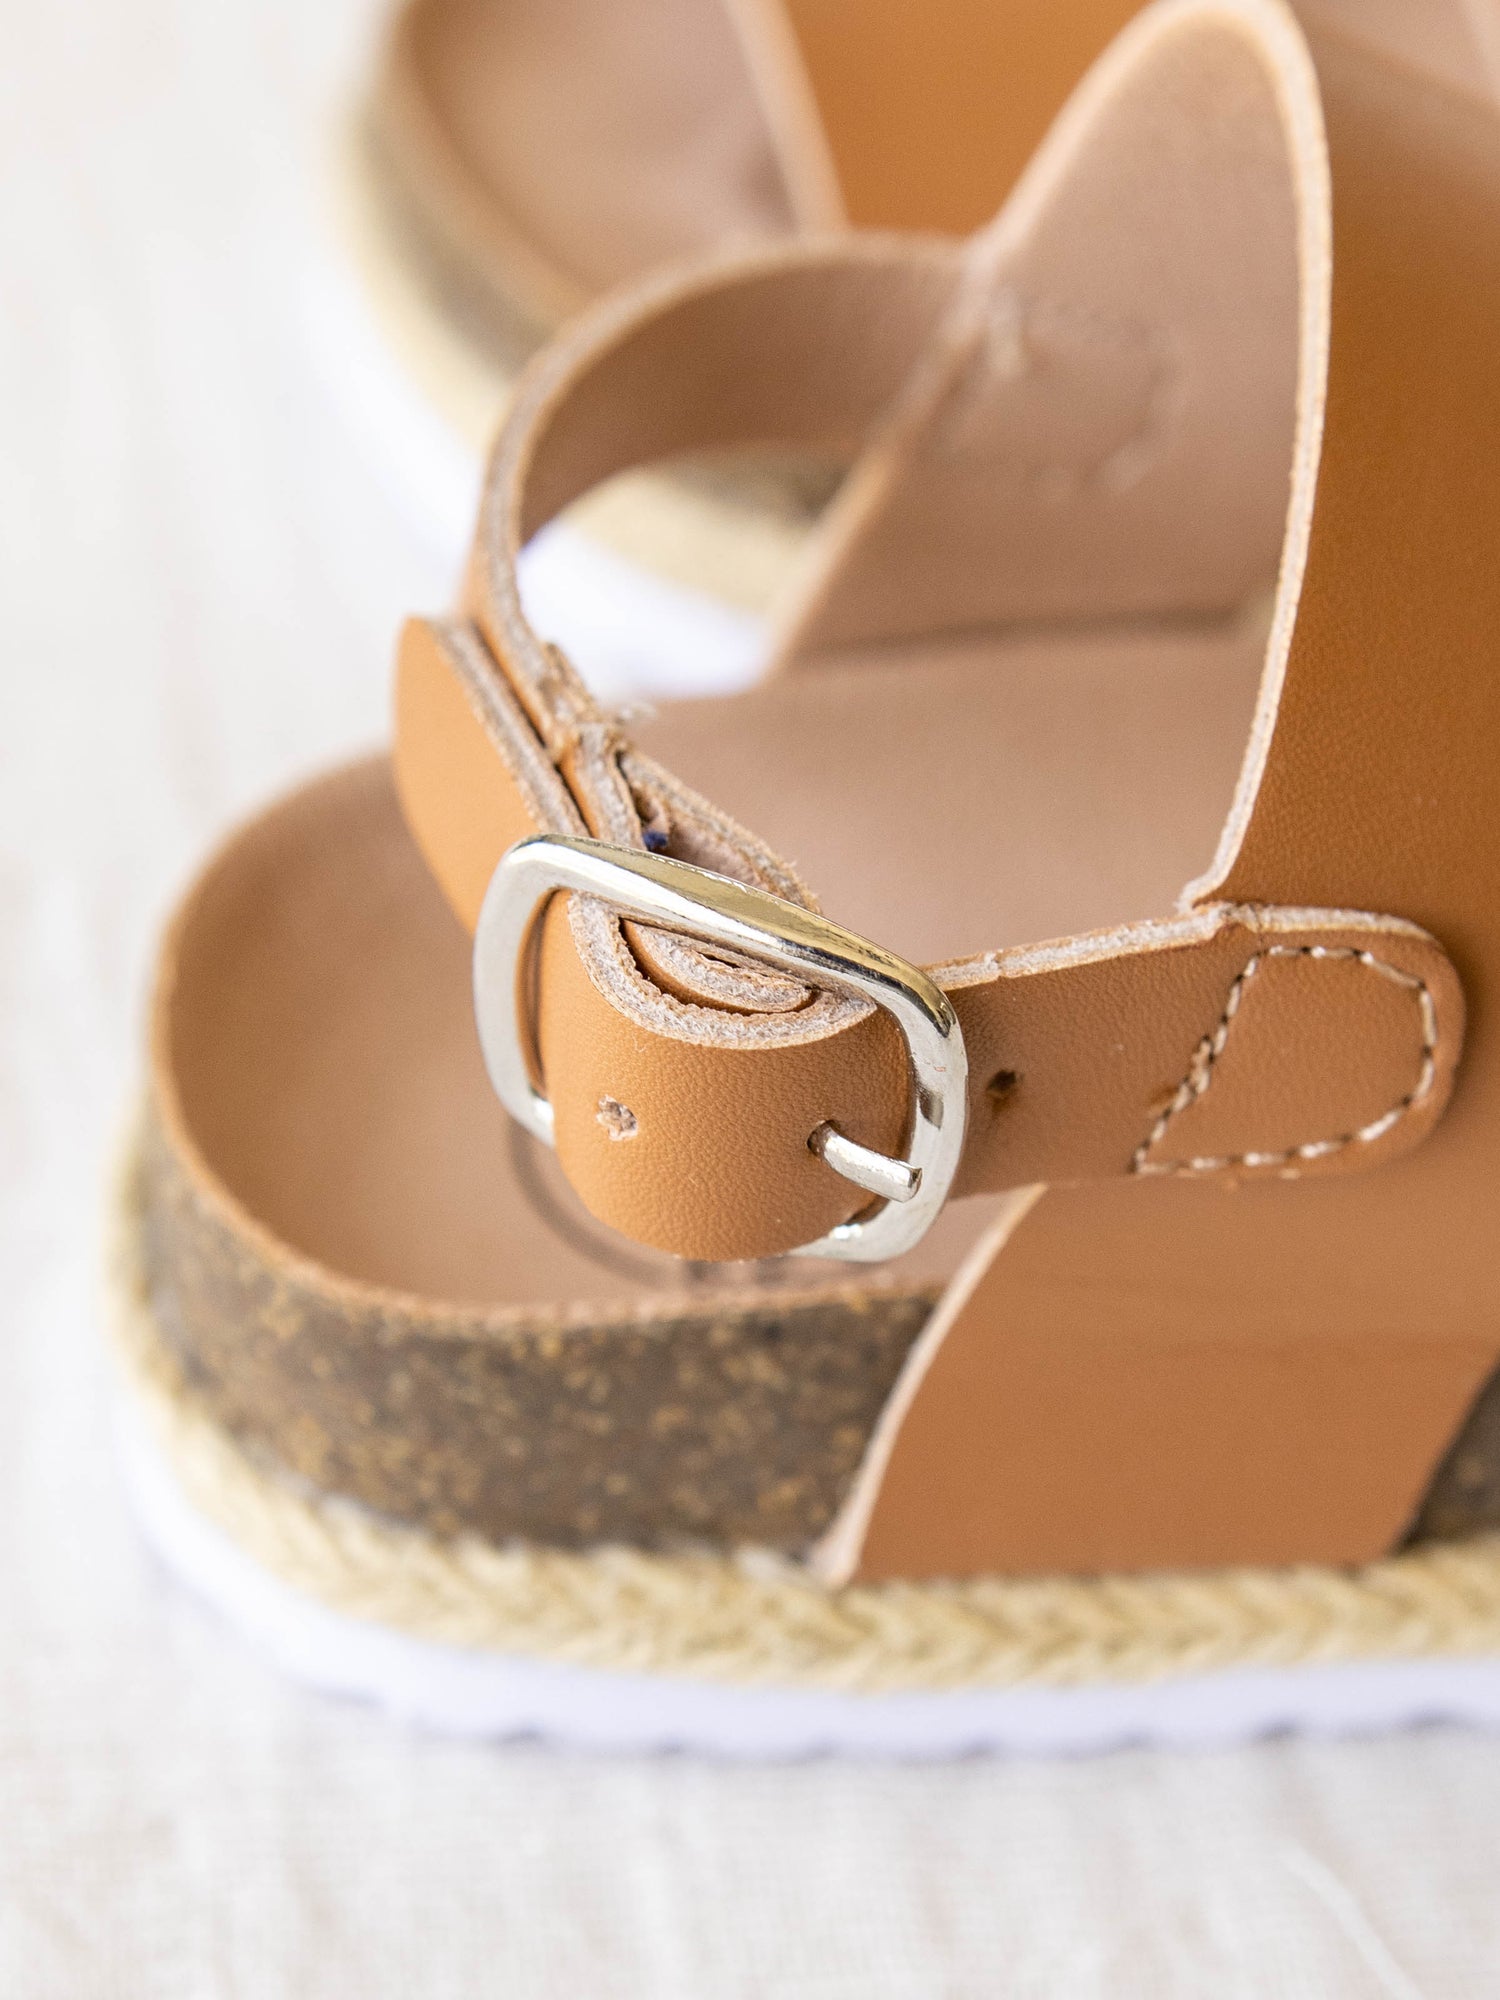 Closeup of the adjustable ankle strap and metal buckle.